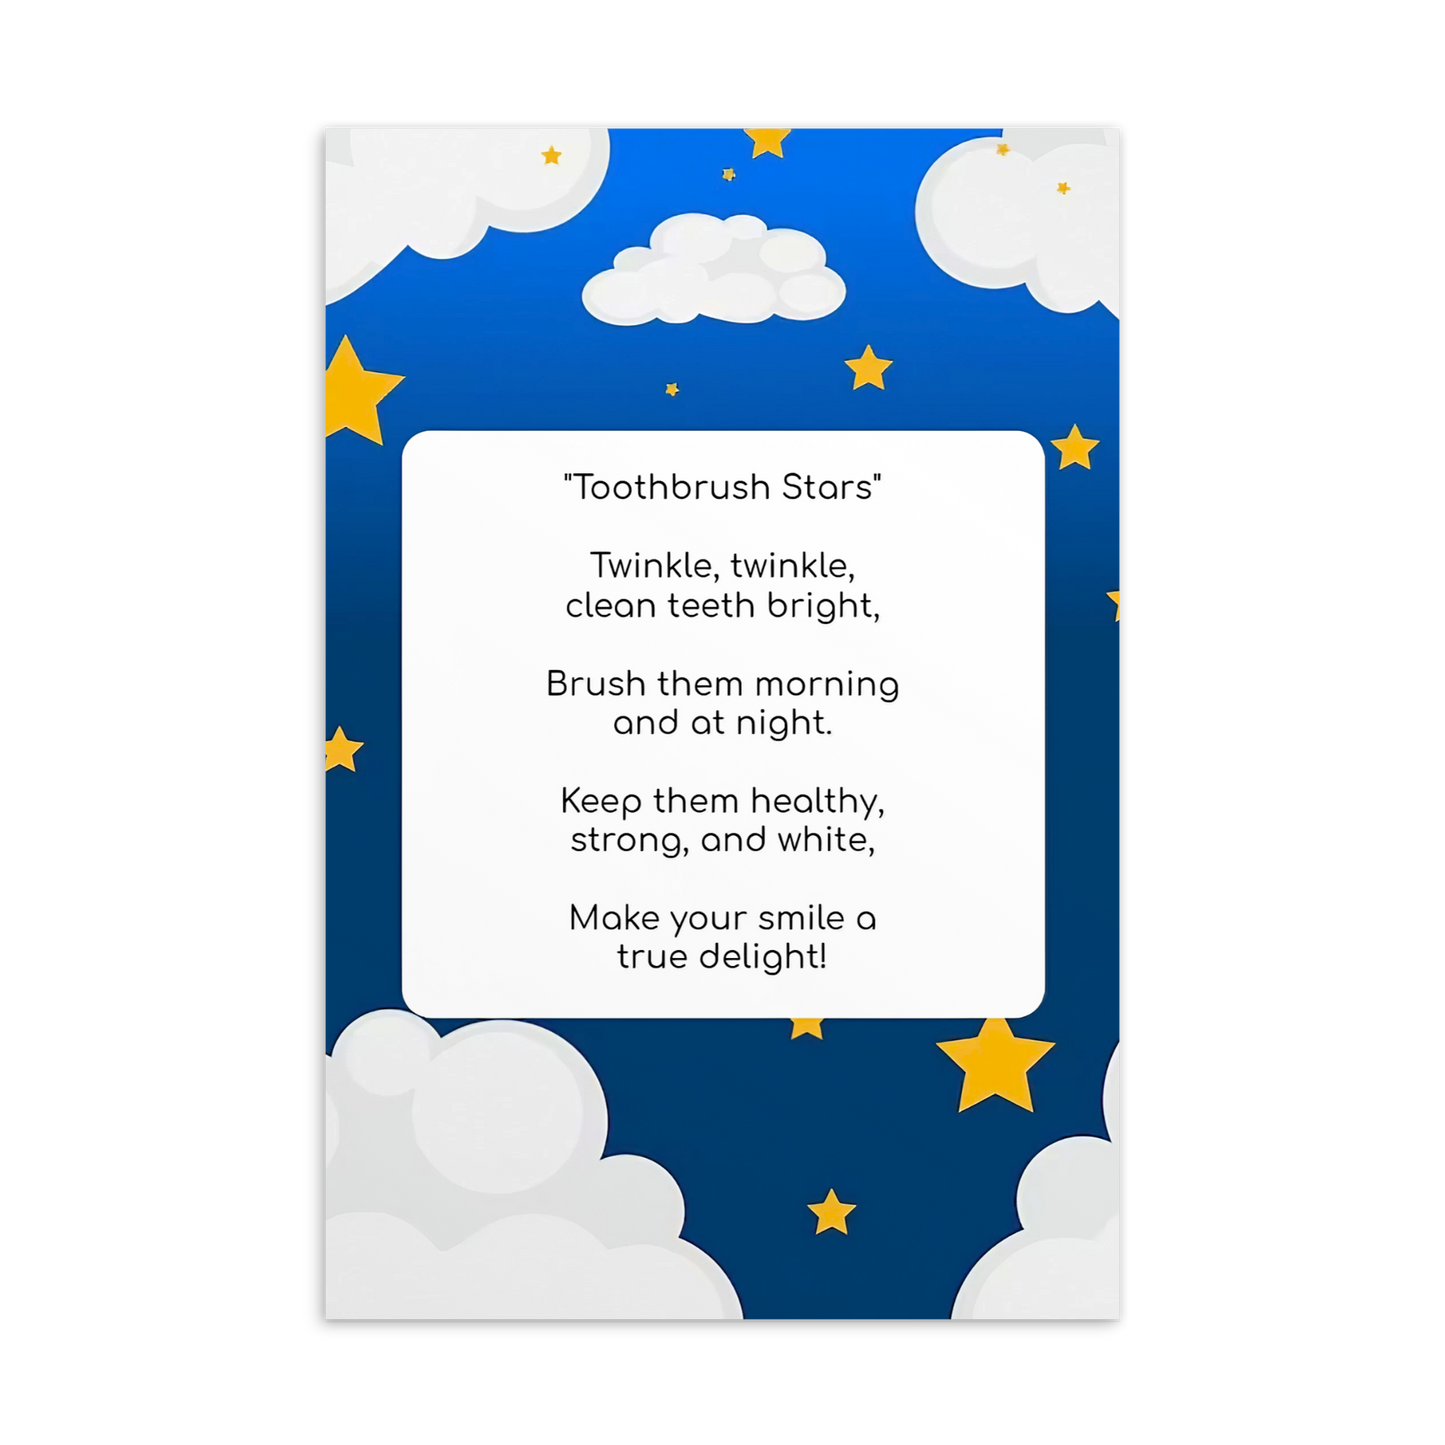 Toothbrushing Song Cards- Toothbrush Stars (To The Tune Of "Twinkle, Twinkle Little Star" Song)